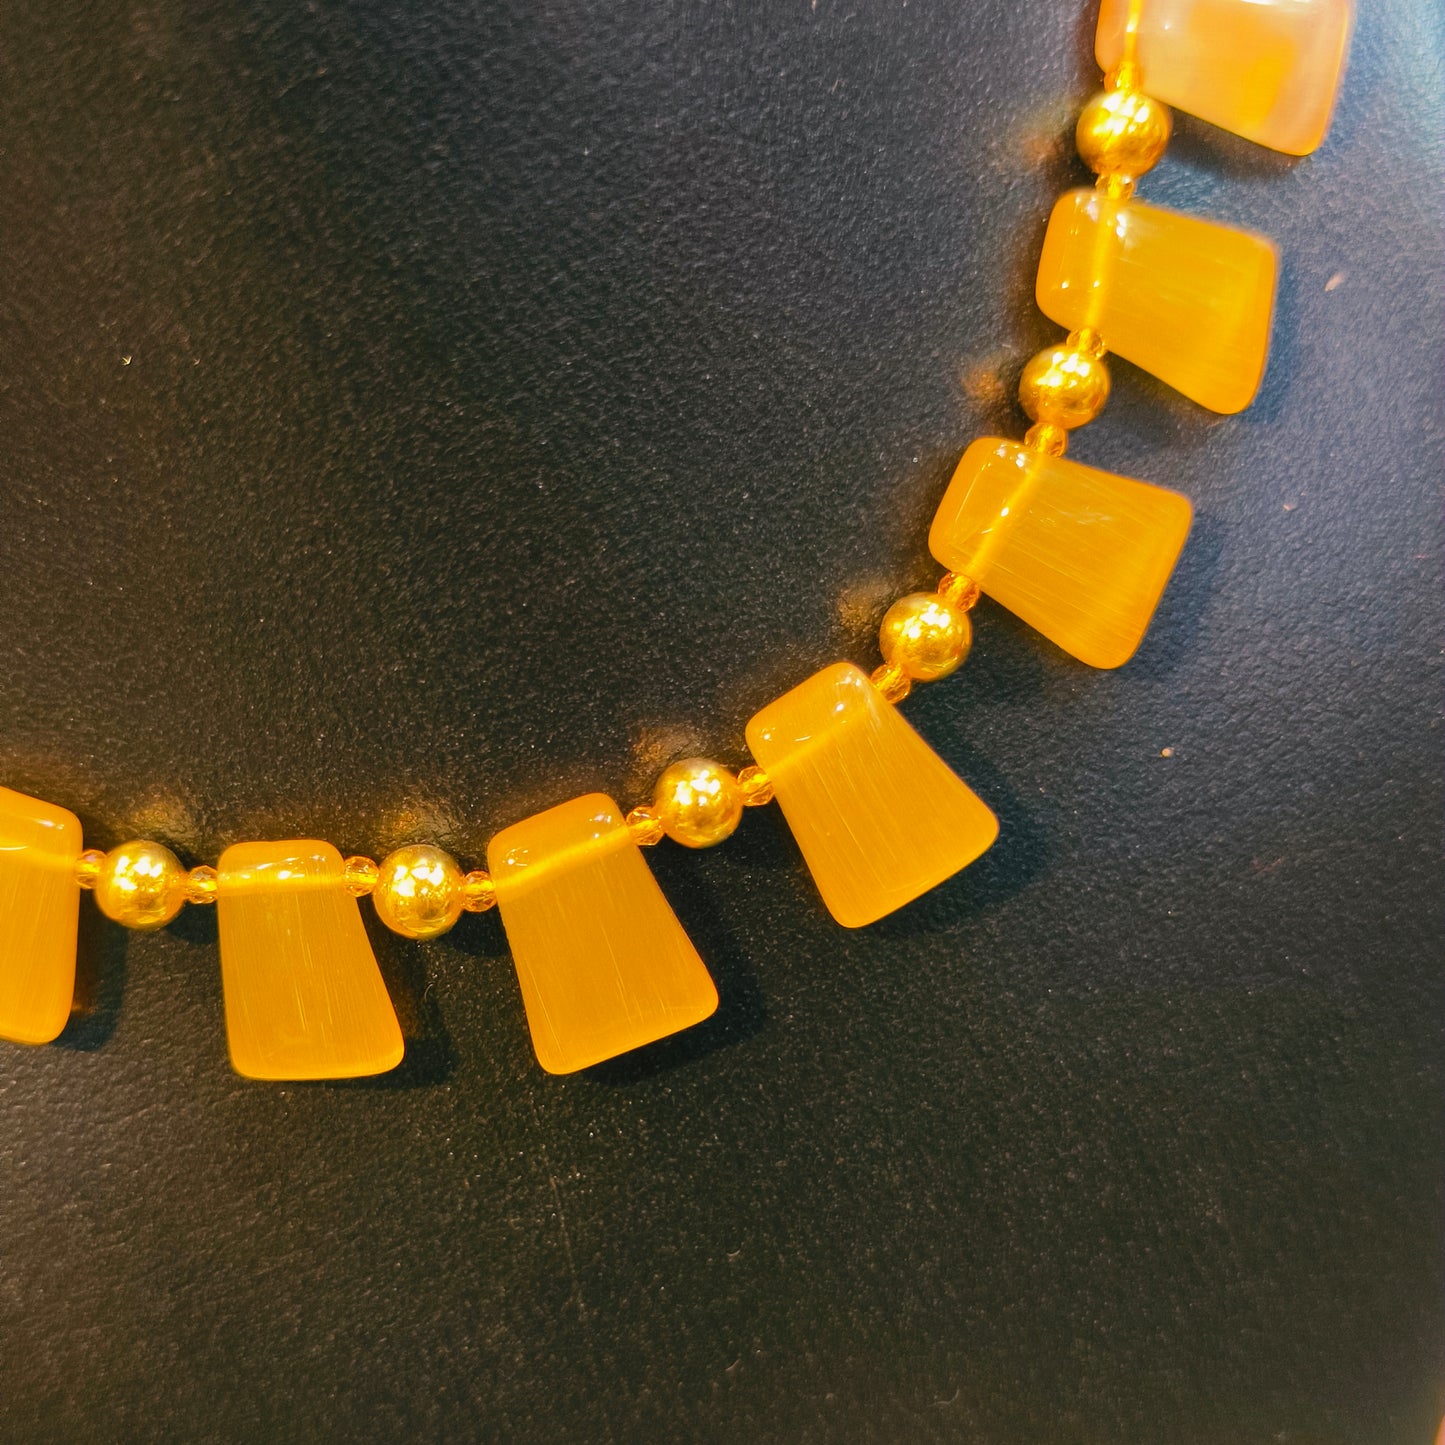 HUID HALLMARK 22KT GOLD TUSHI NECKLACE- SOLD ON MRP (FUTURE EXCHANGE VALUE RS 2800 WITH ANY JEWELLERY FOR LIFETIME)